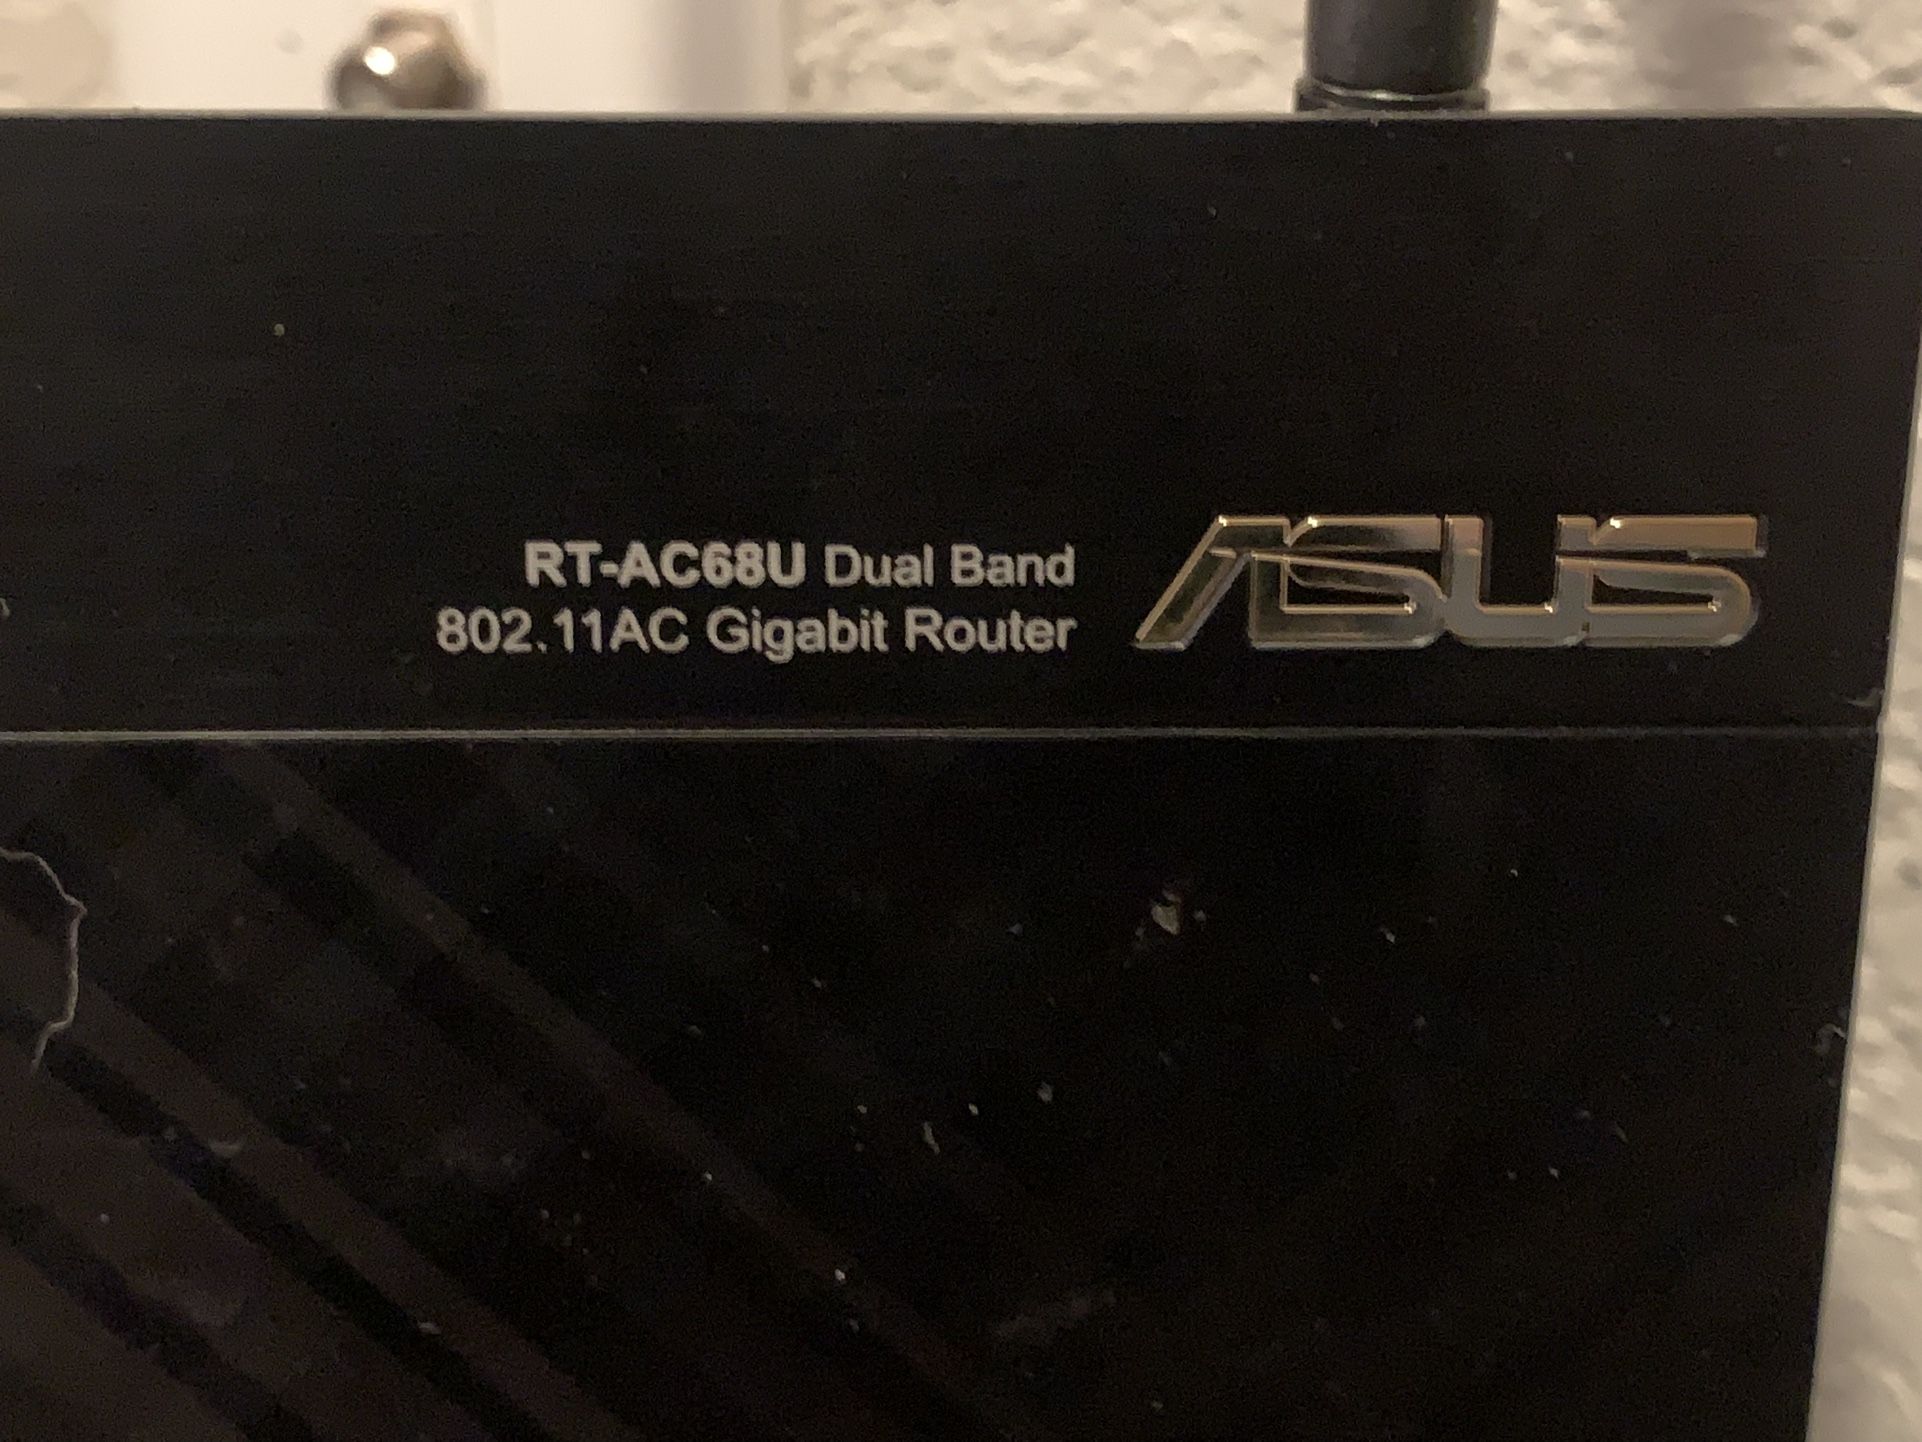 Asus wireless AC1900 Dual band wi-fi router 